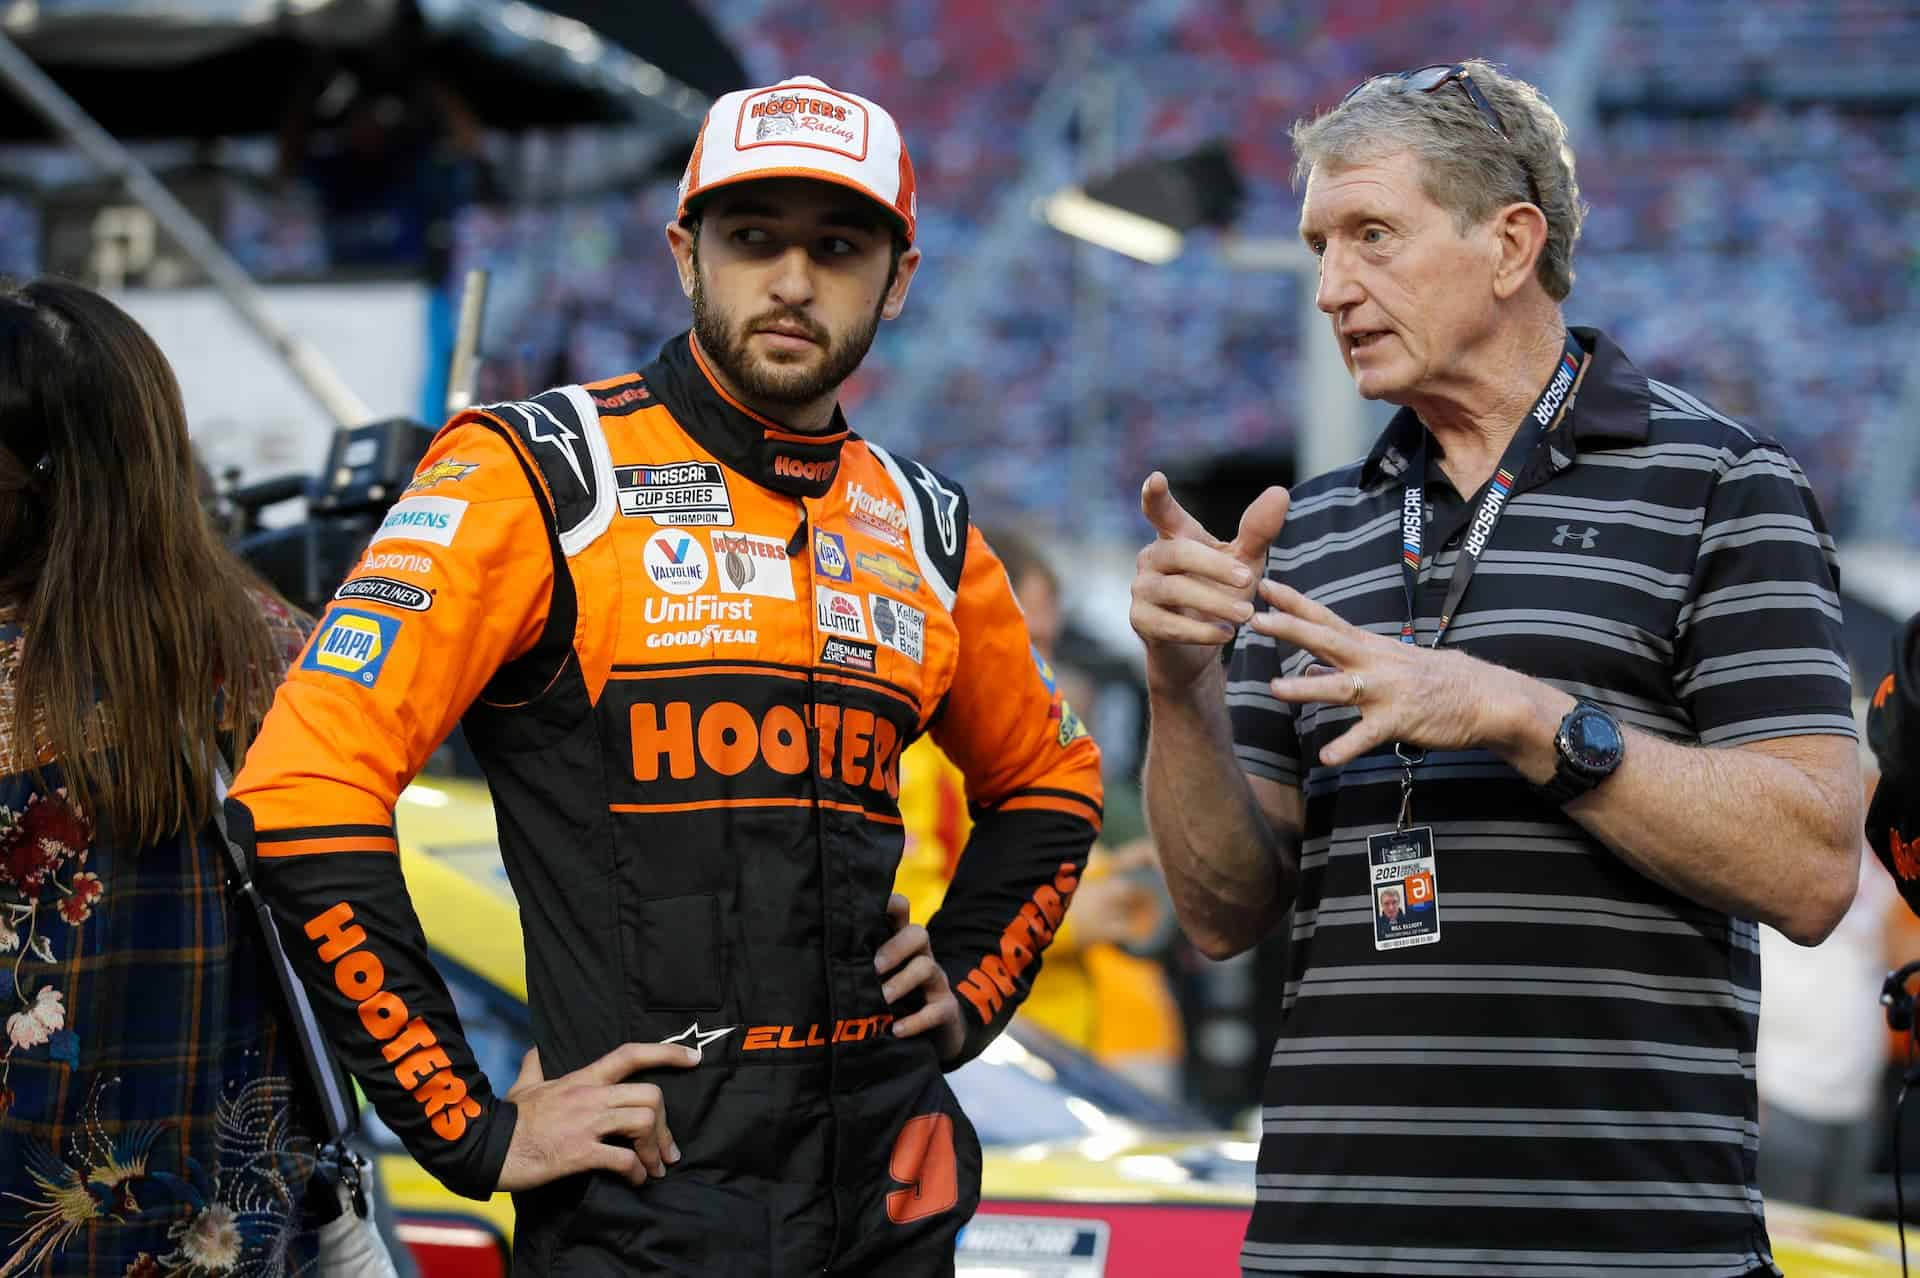 Chase Elliott talks with father Bill Elliott at Bristol Motor Speedway in 2021. Voting for the NASCAR Most Popular Driver Award is open on Tuesday, November 9.